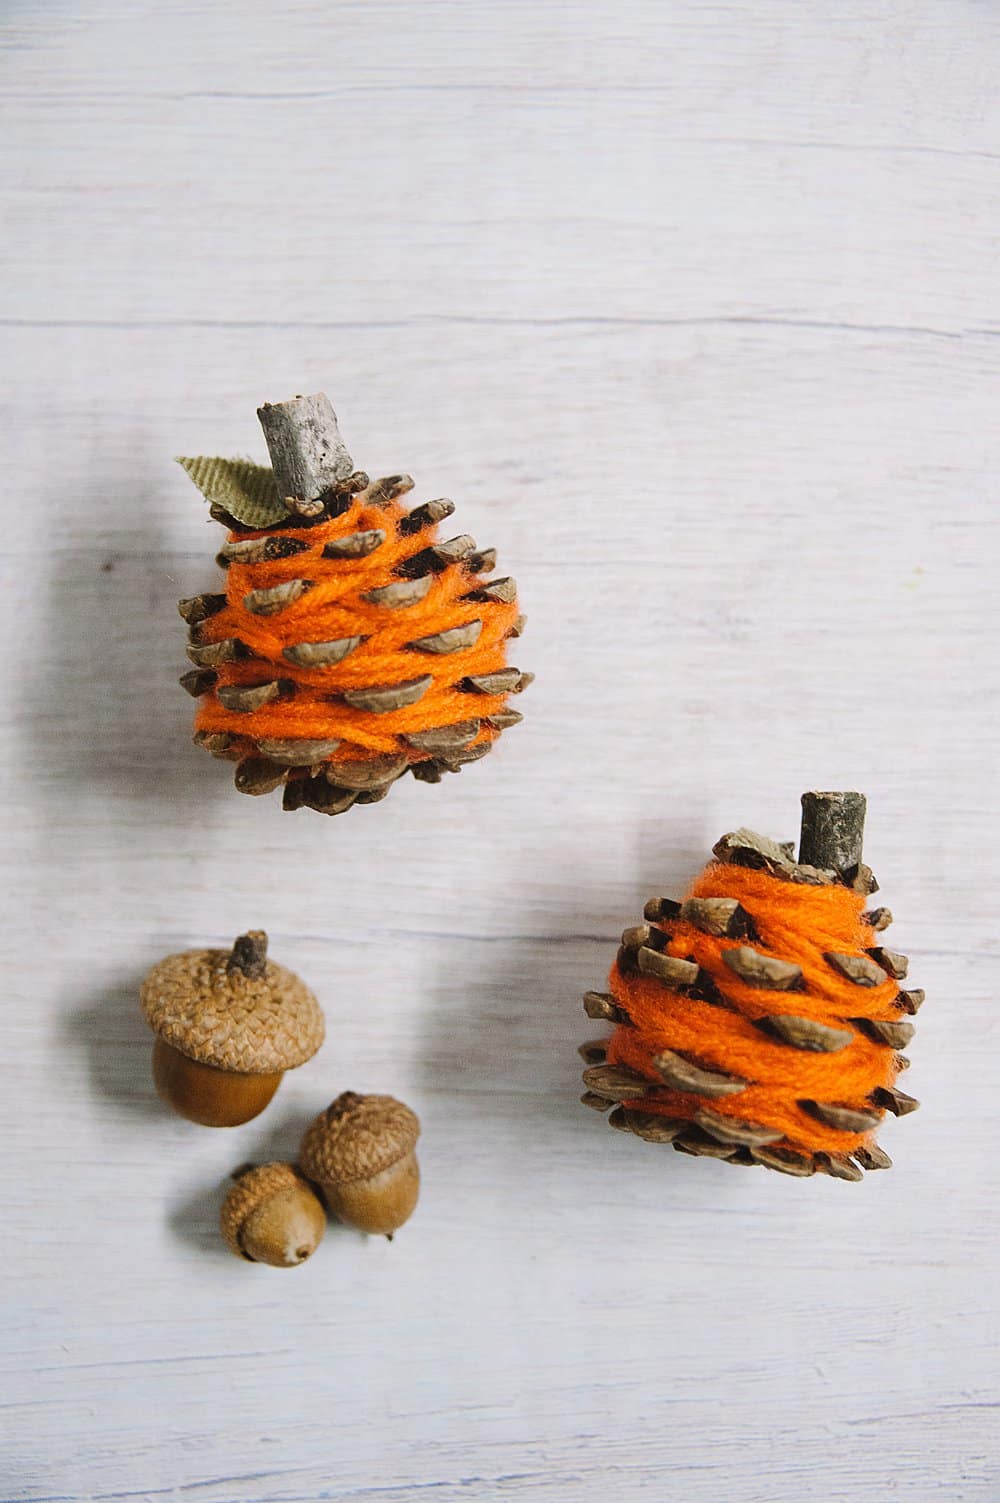 How to Make Yarn Wrapped Pinecone Pumpkins